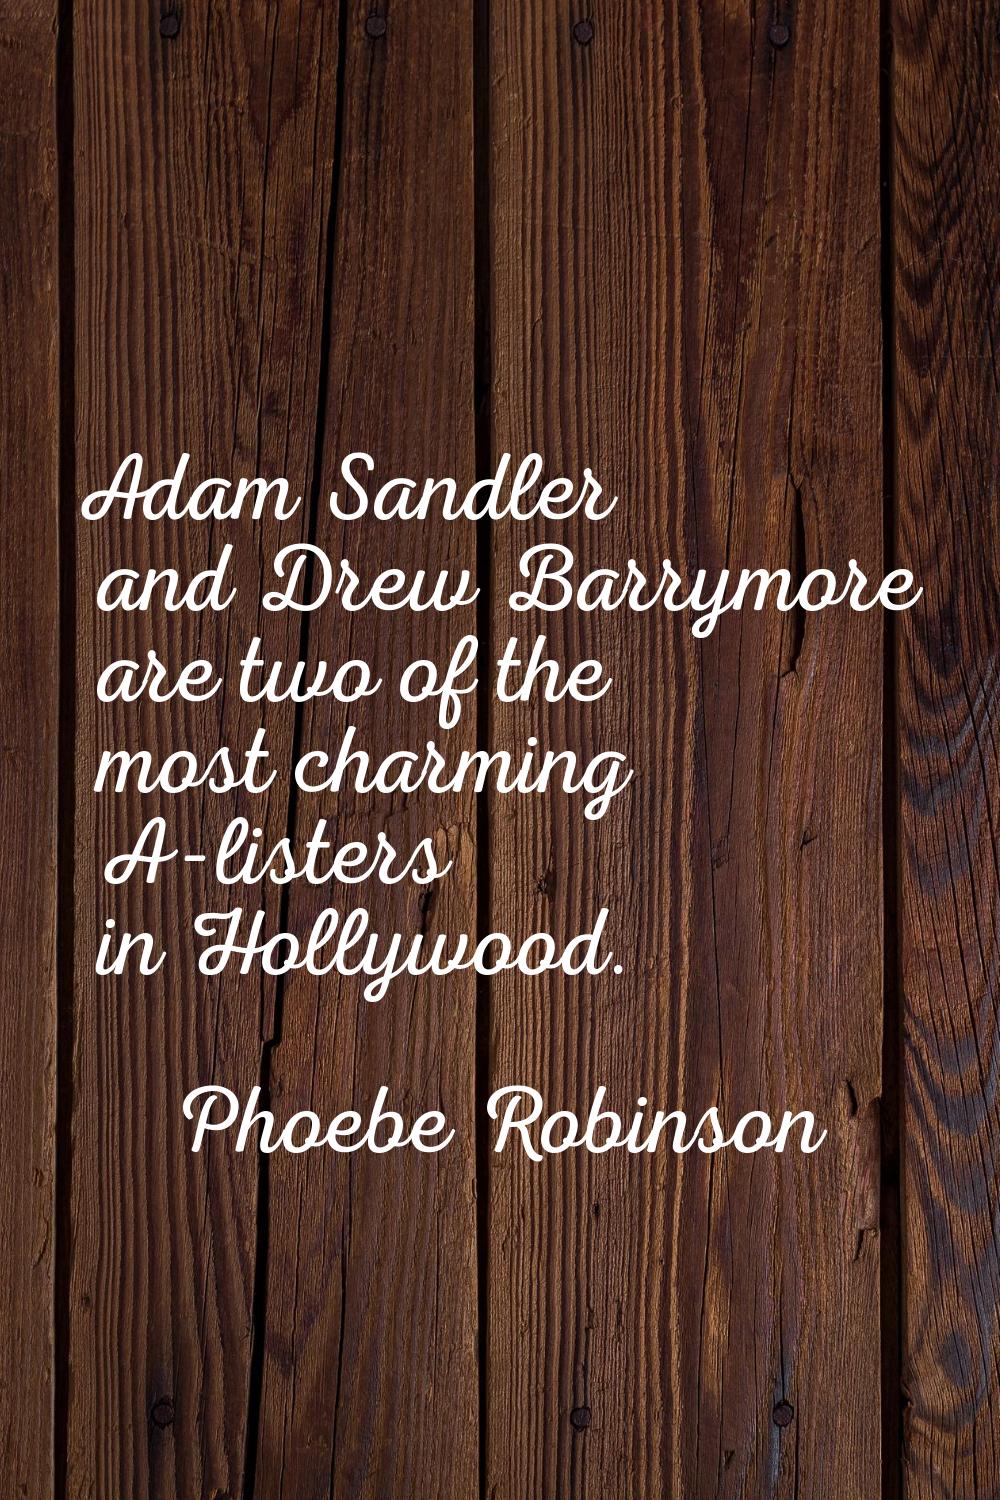 Adam Sandler and Drew Barrymore are two of the most charming A-listers in Hollywood.